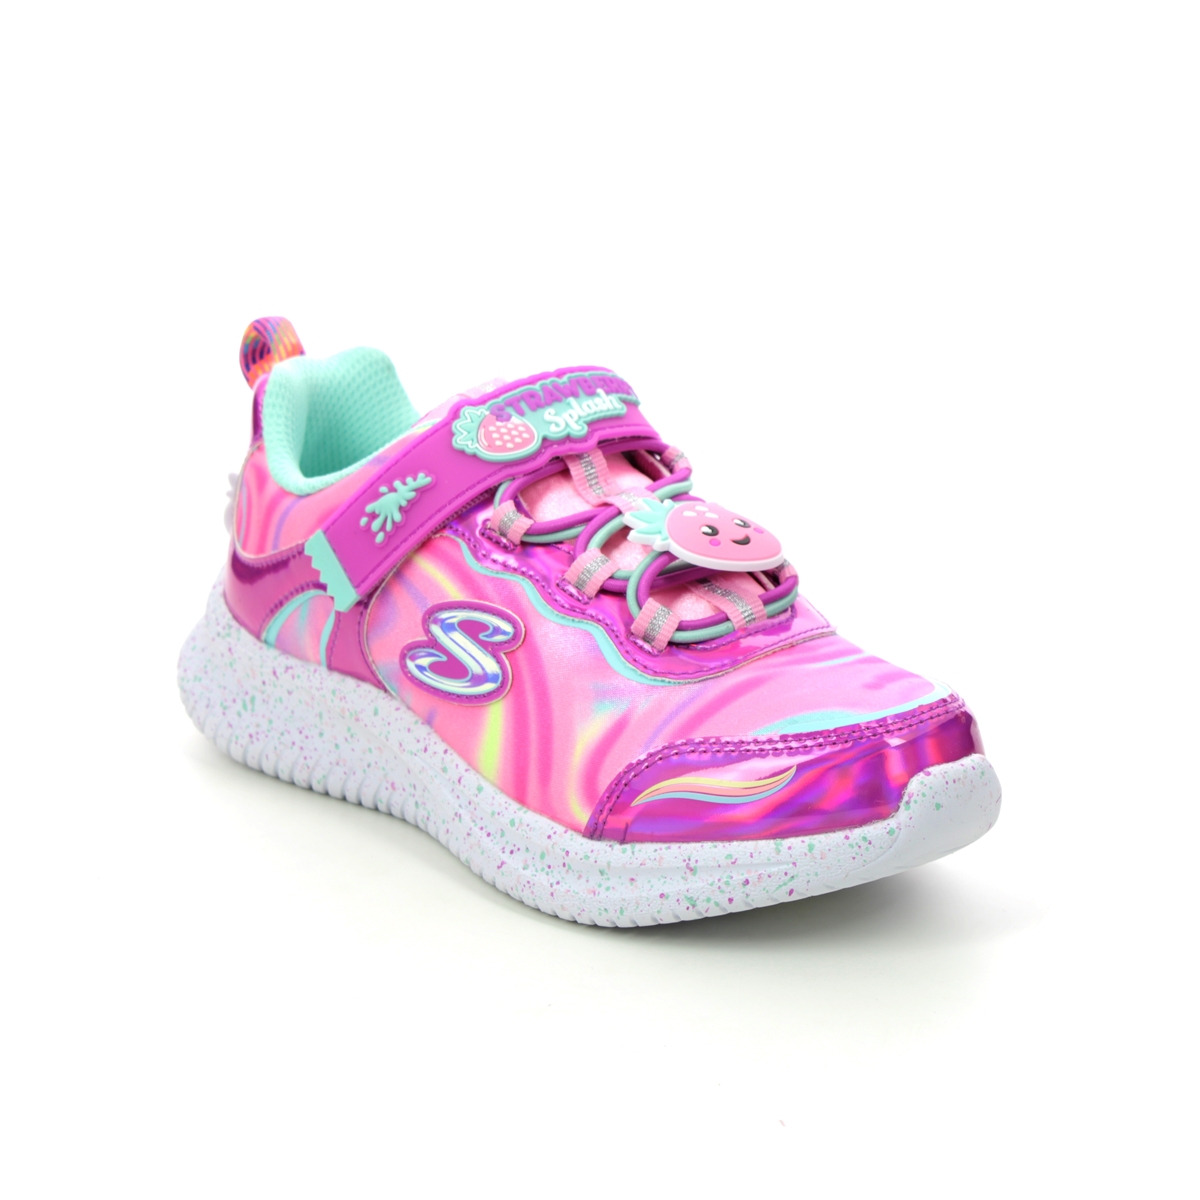 Skechers Jumpsters Sweet Pink Kids Girls Trainers 302215L In Size 25 In Plain Pink For kids